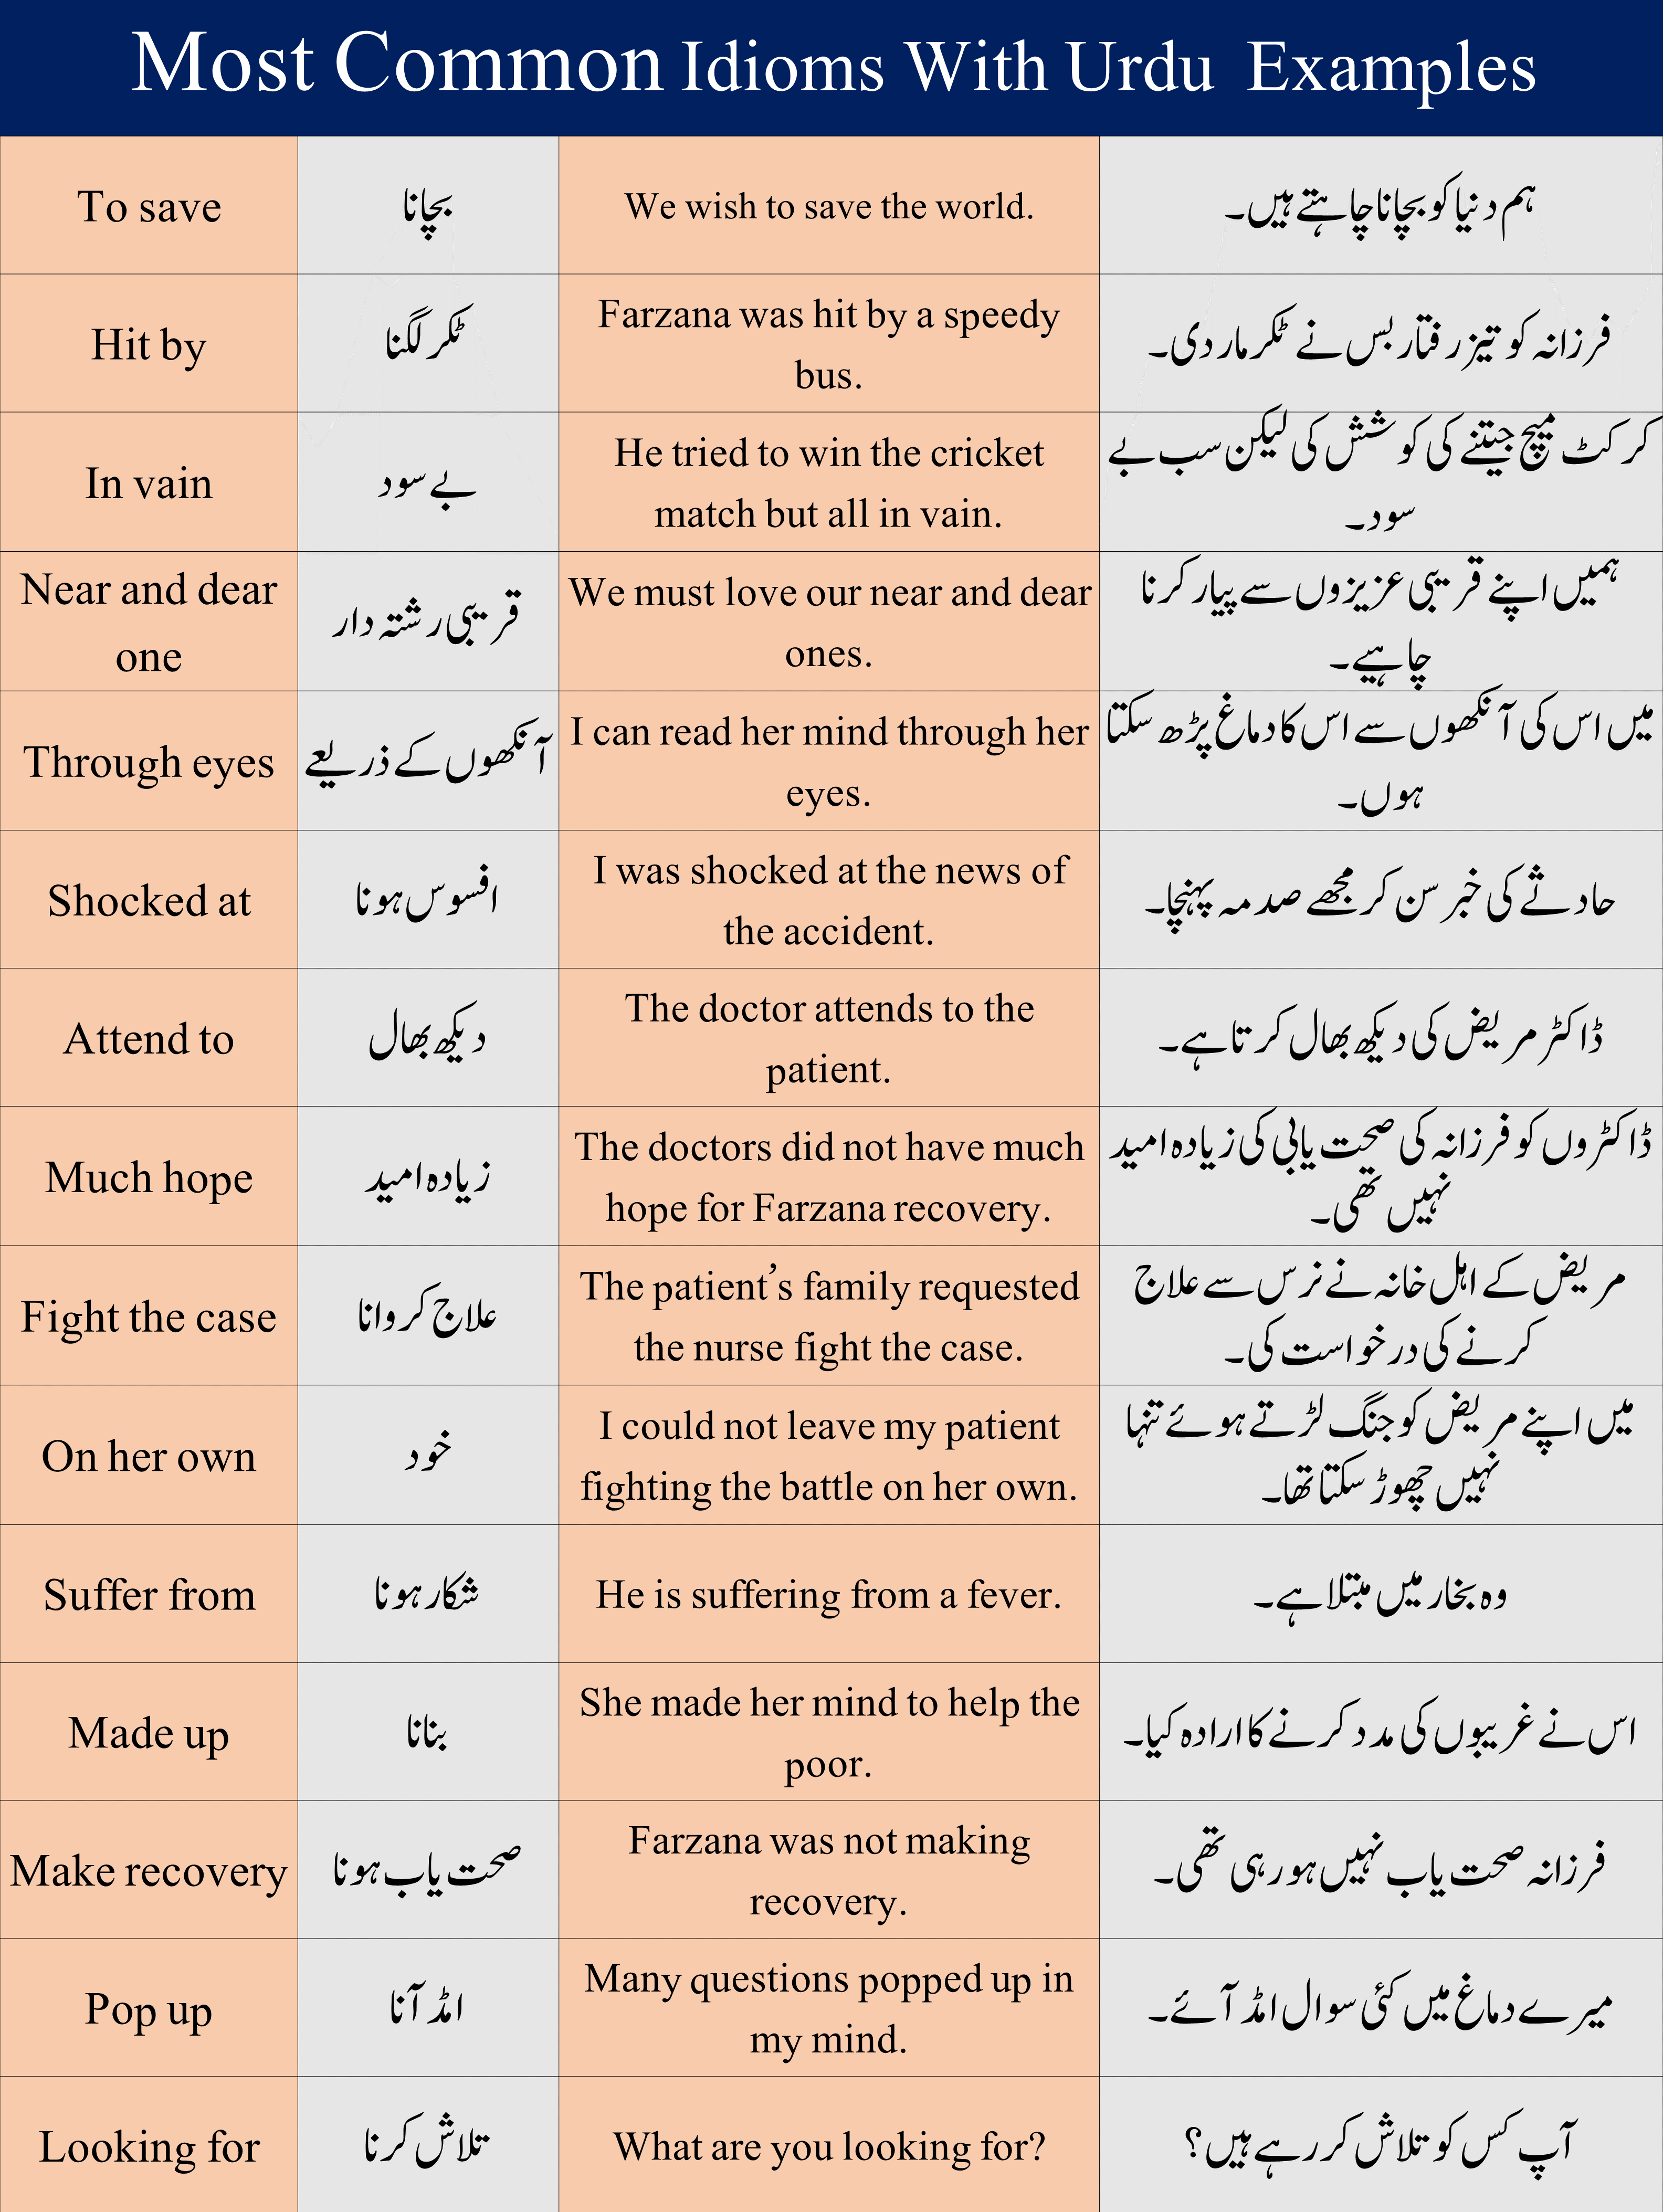 Idioms Meaning in Urdu, Common English Idioms